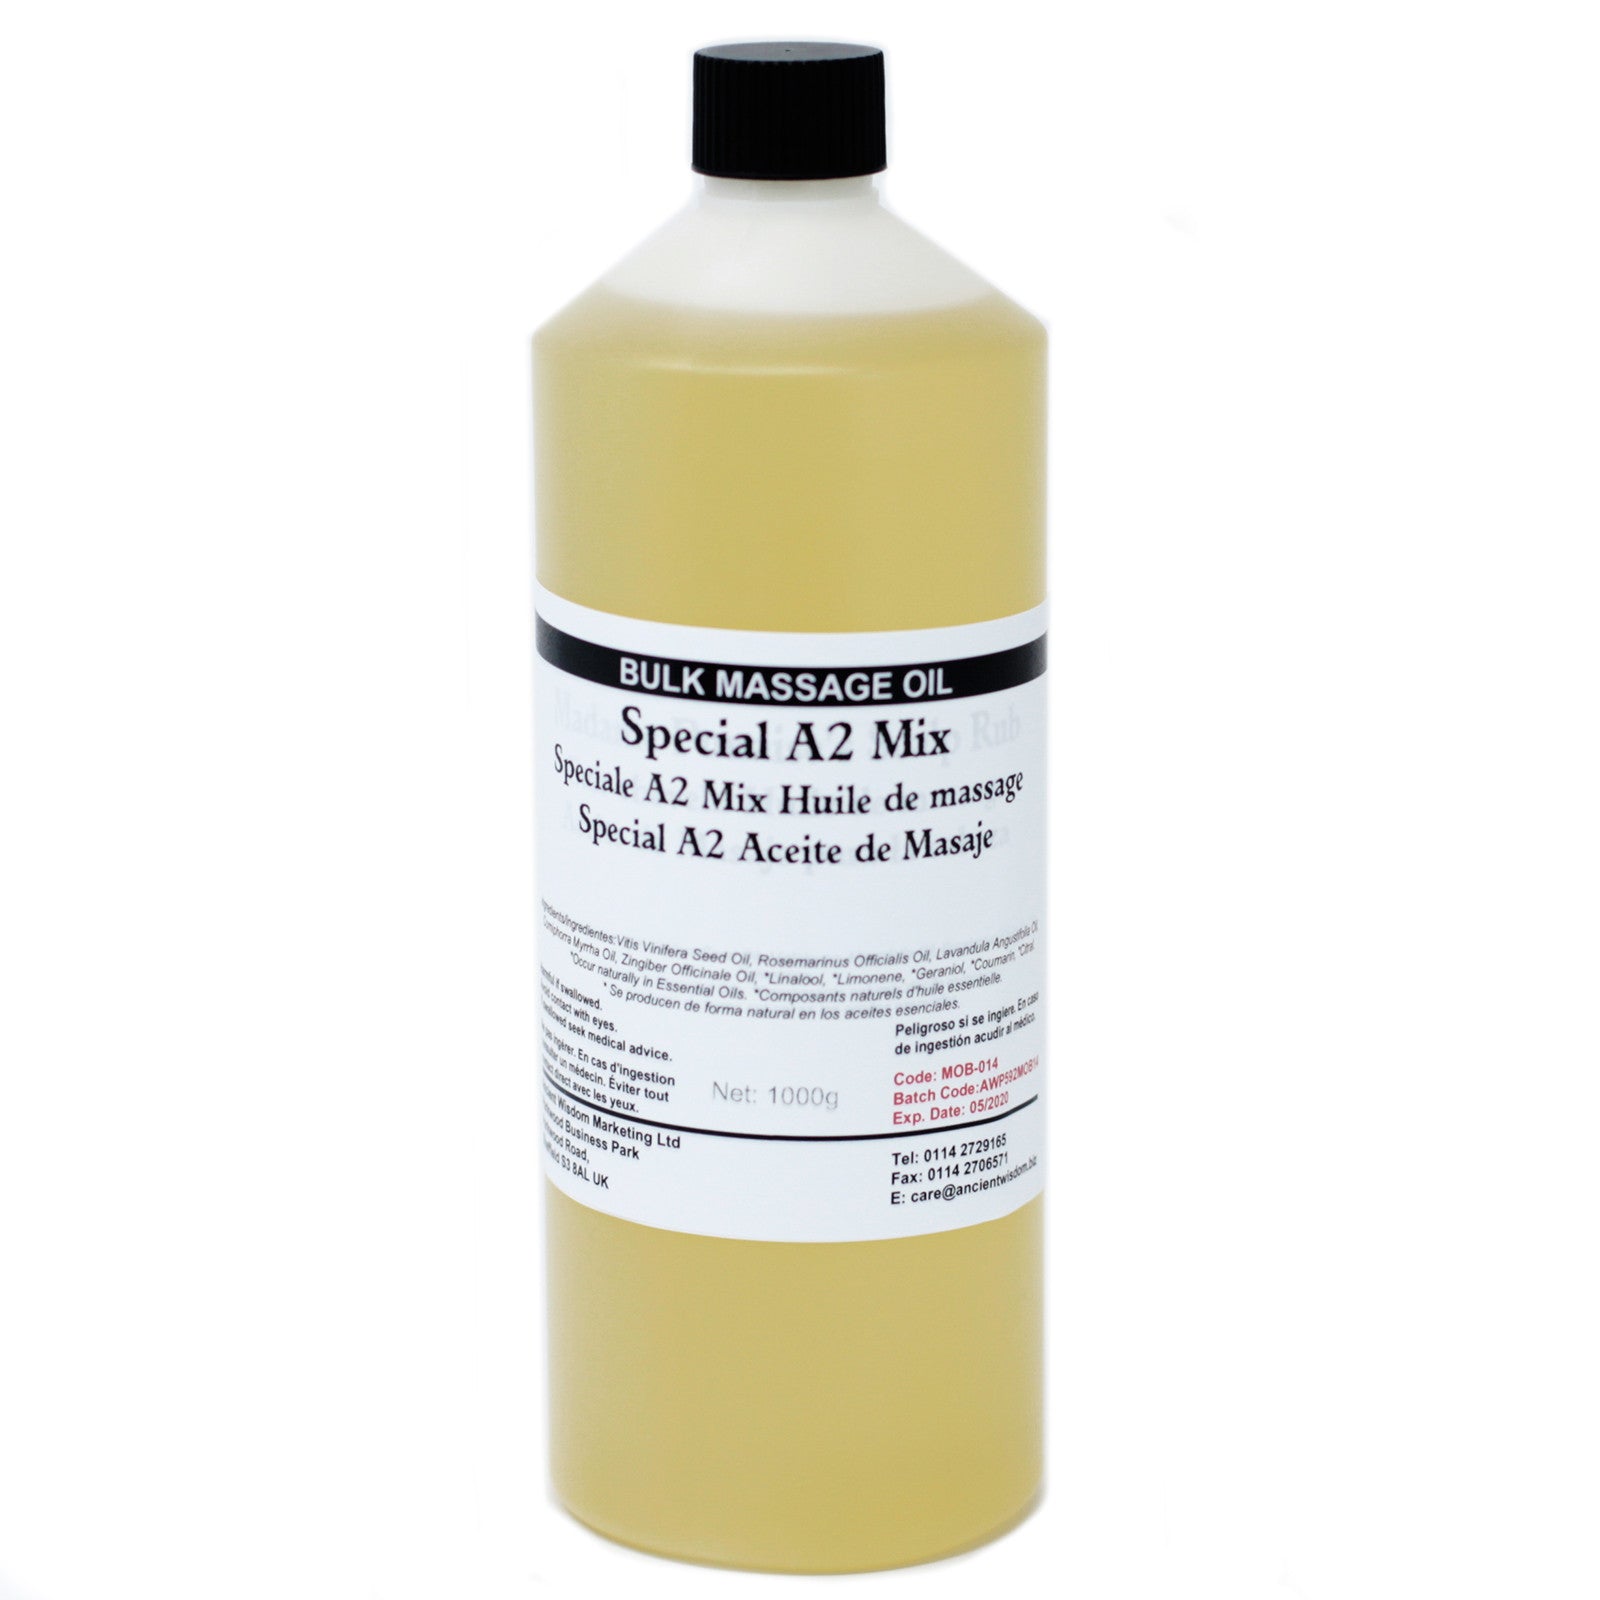 View Special A2 Mix 1Kg Massage Oil information